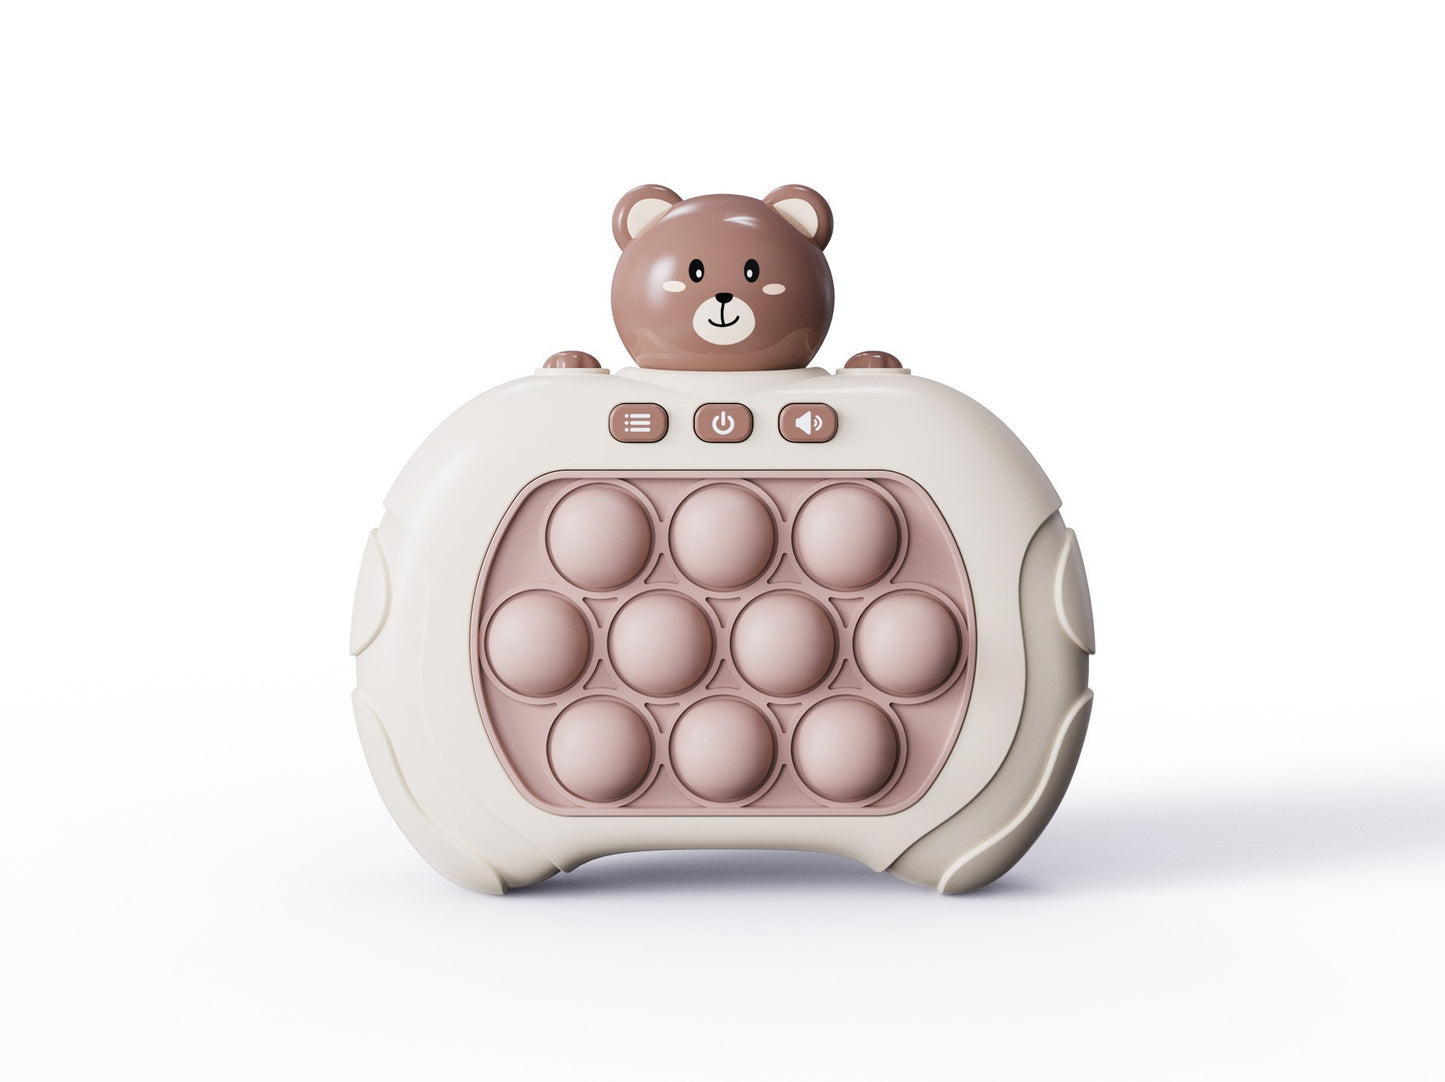 Pioneer in cross-border rodent eradication, Press and Play game console and Whac-a-mole game console to push through the levels of children's educational toys wholesale